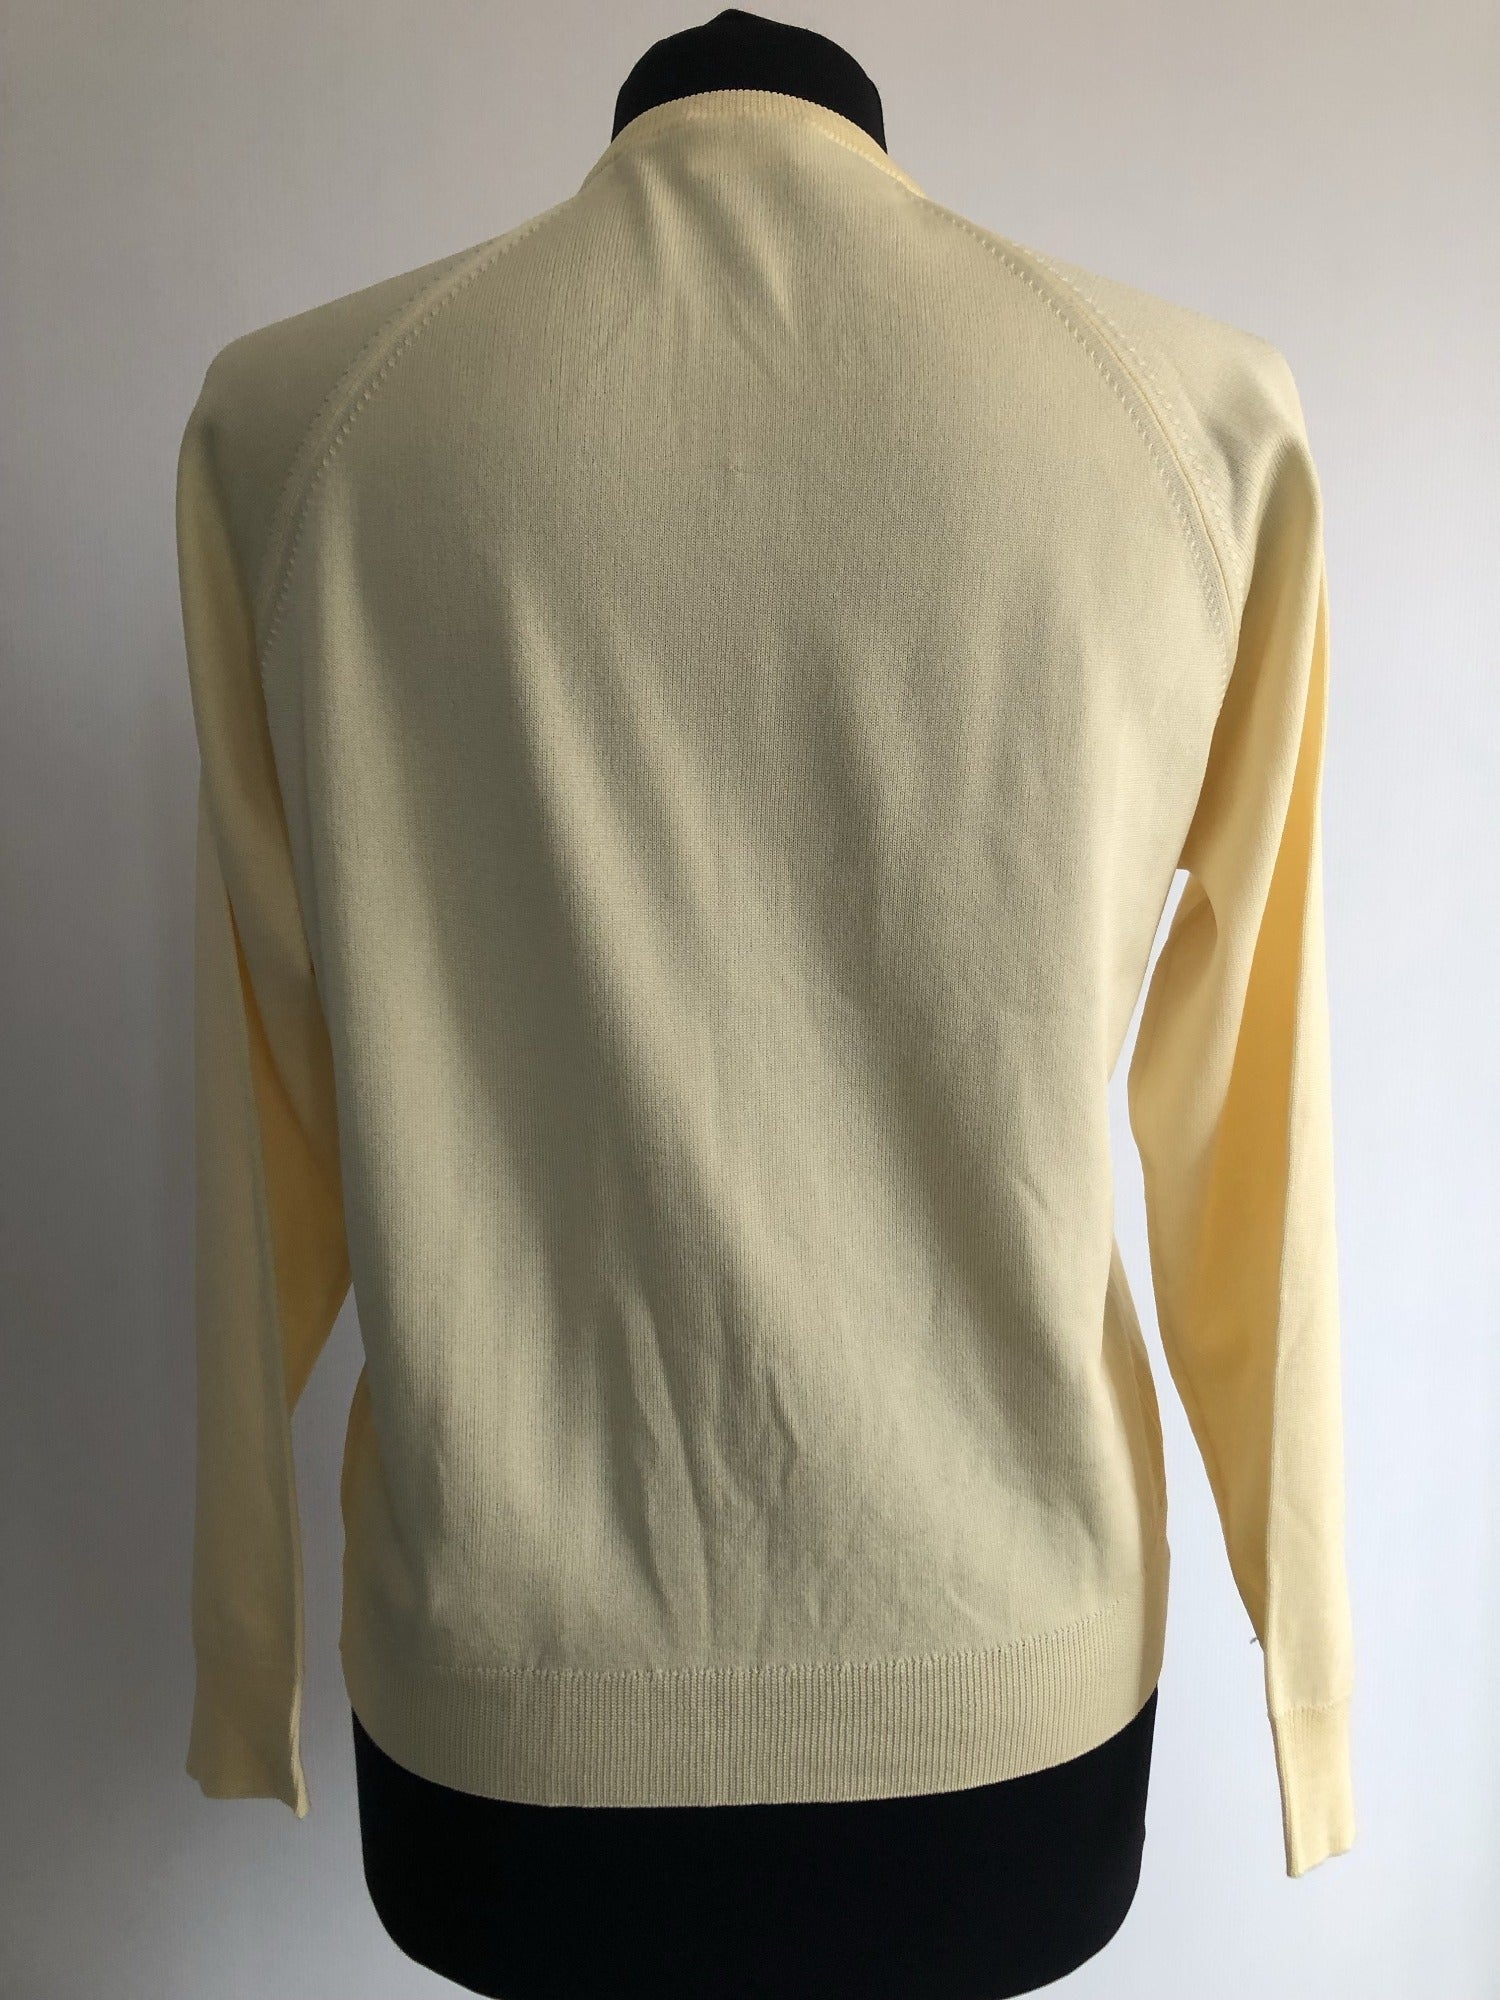 Yellow  womens  vintage  Urban Village Vintage  St Michael  MOD  Lightweight Knit  light knit  knitwear  knitted  knit  cropped  cardigan  60s  1960s